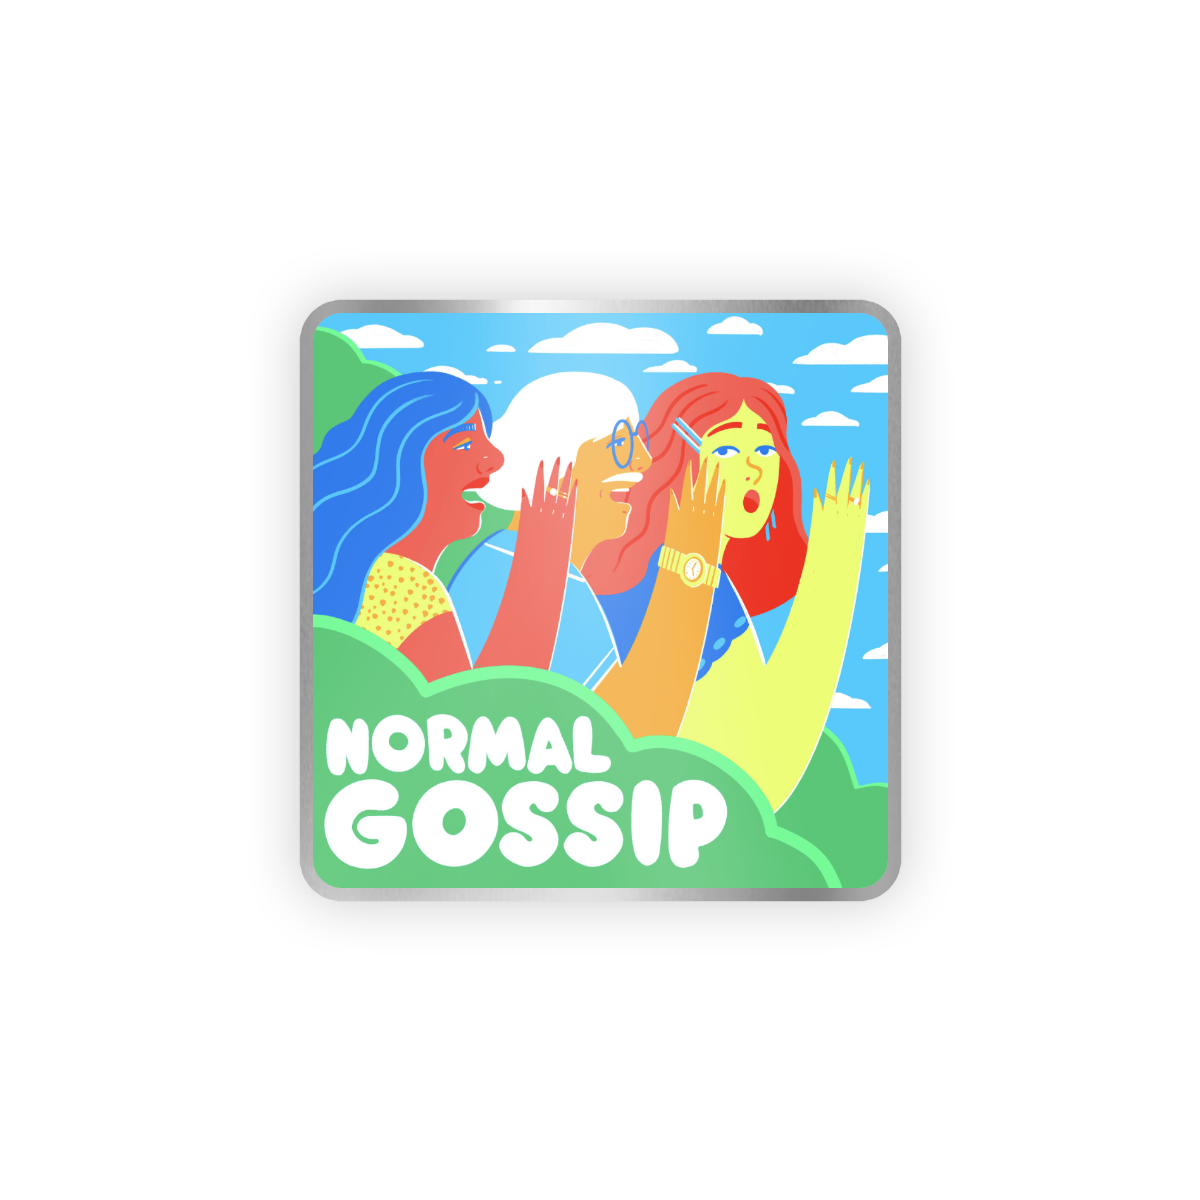 A normal gossip lapel pin with the logo and words normal gossip